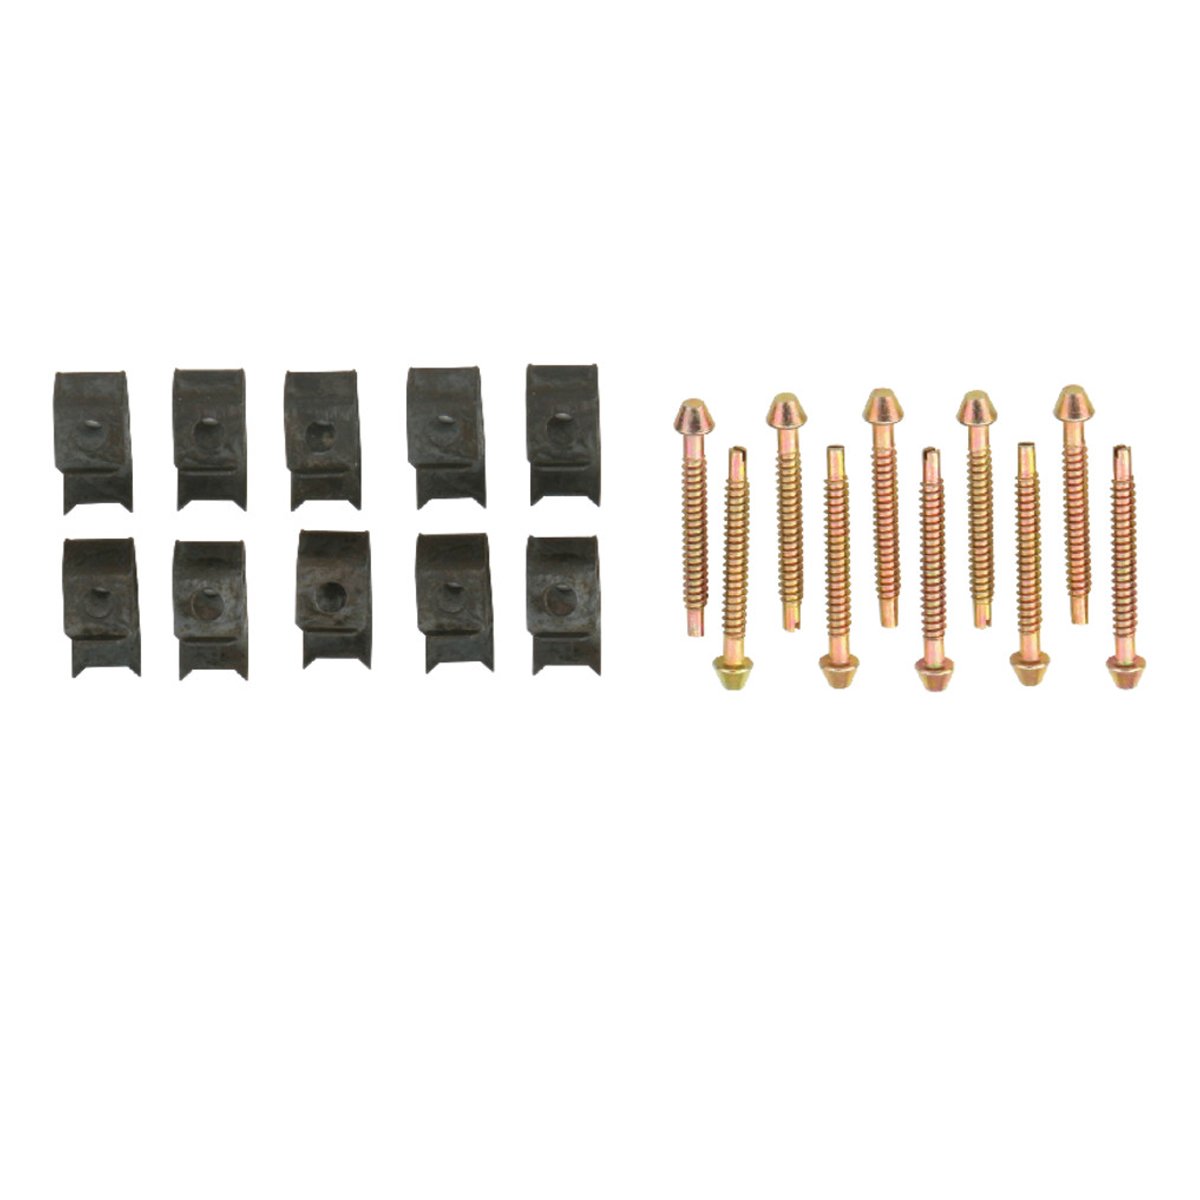 Kingston Brass Surface Mount Clip 10 Clips Pack